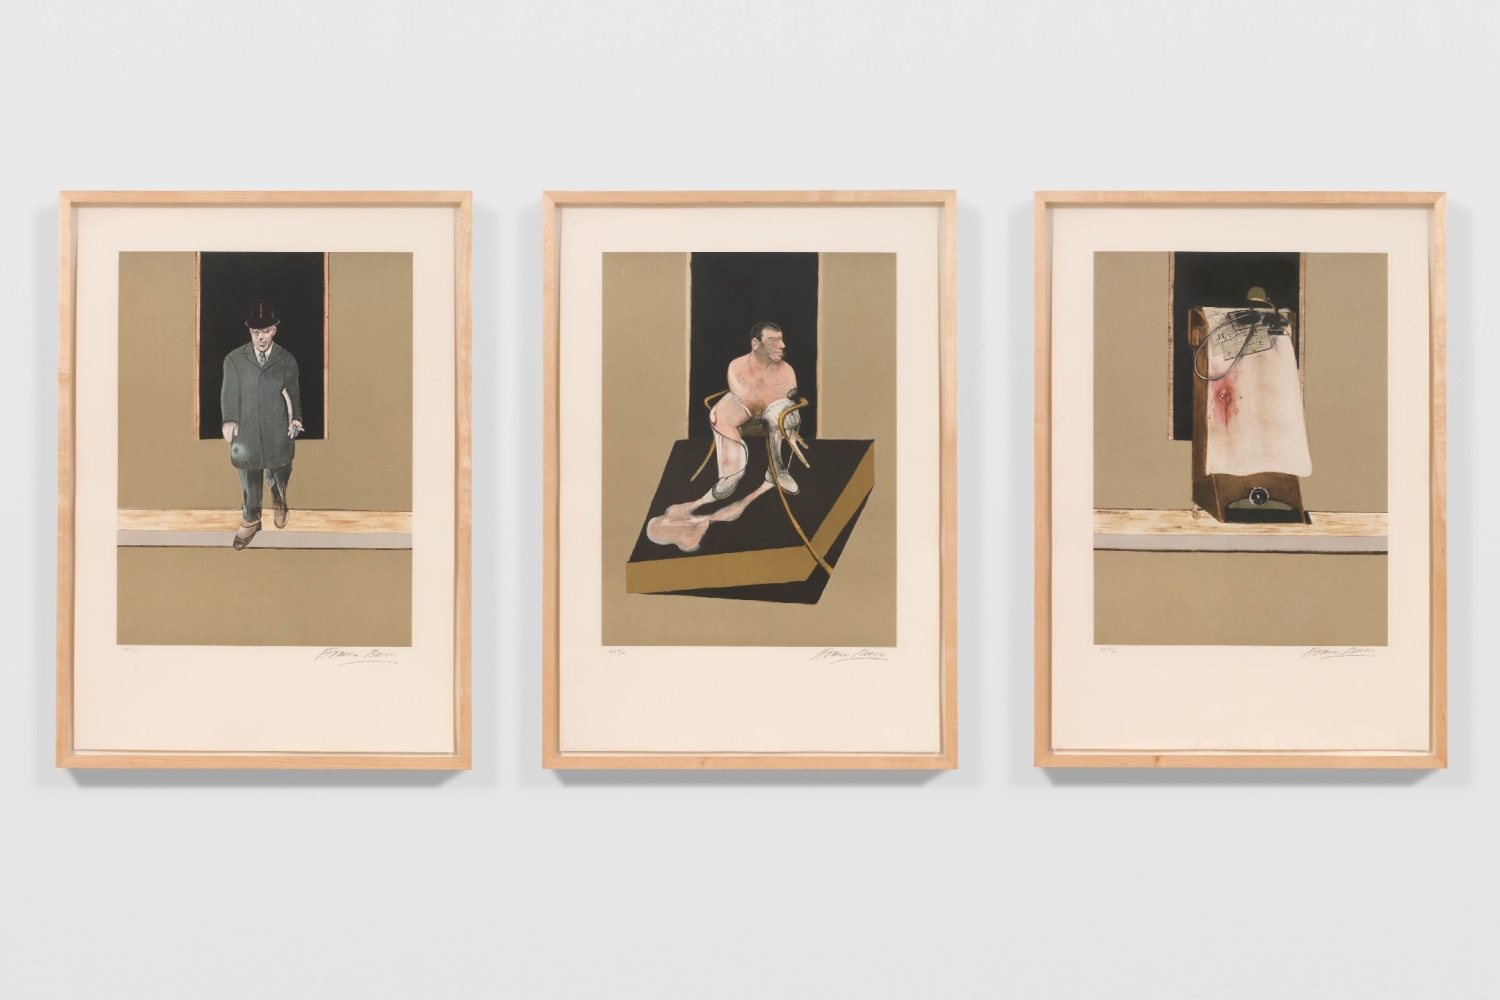 Francis Bacon
Triptych 1986-1987, 1988

a set of 3 etchings and aquatints on Arches paper,&amp;nbsp;ed. of 99 + 15 AP

plate: each 25 3/4 x 19 1/4 in. / 65.4 x 48.9 cm

sheet: each 35 3/8 x 24 3/4 in. / 89.9 x 62.9 cm